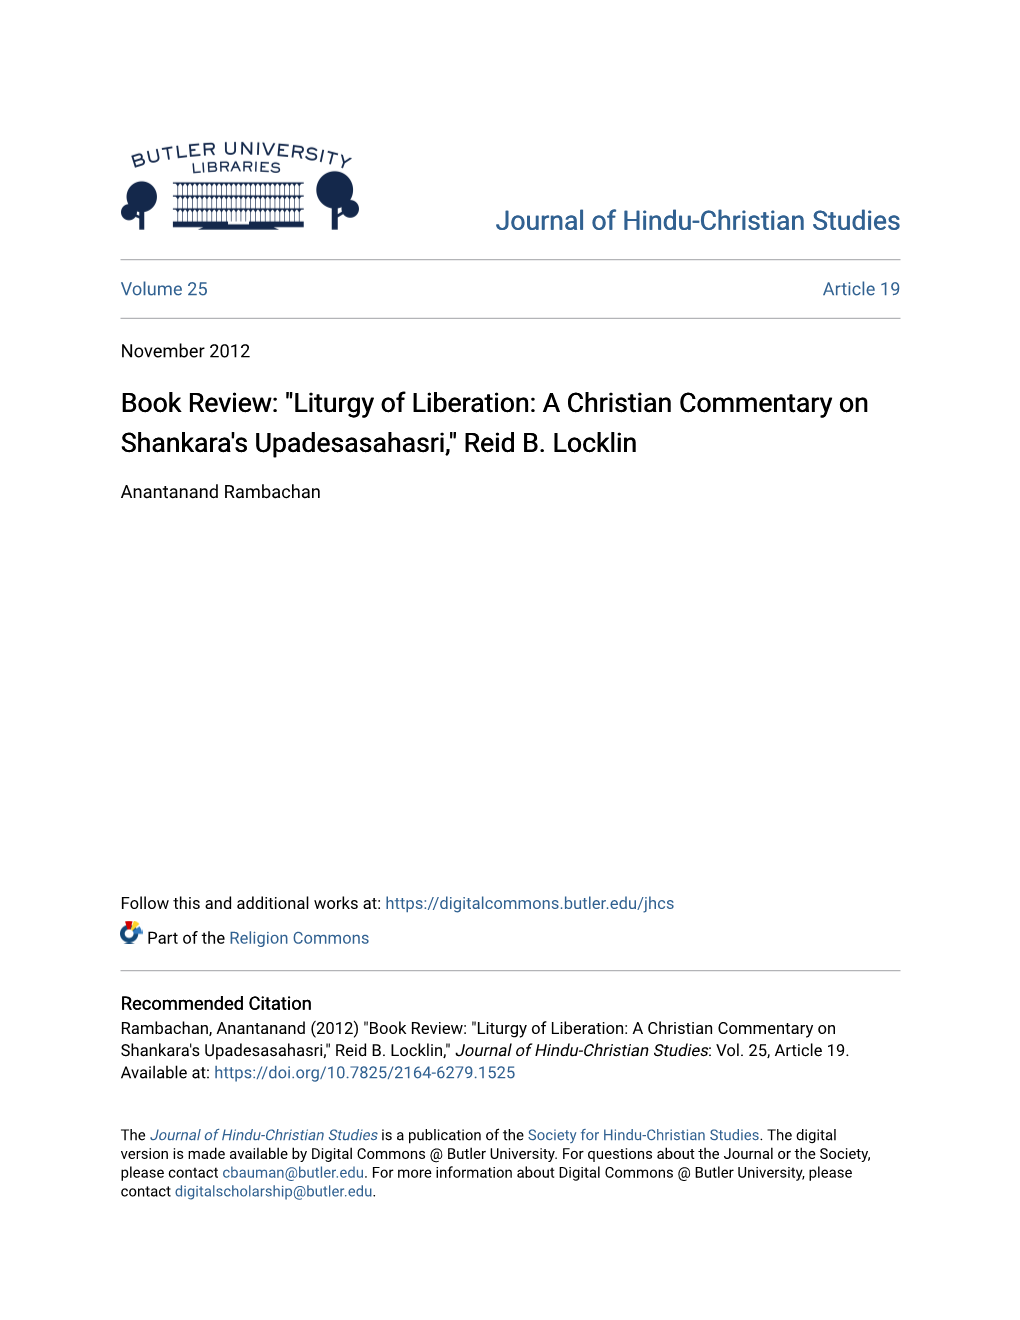 Book Review:" Liturgy of Liberation: a Christian Commentary On